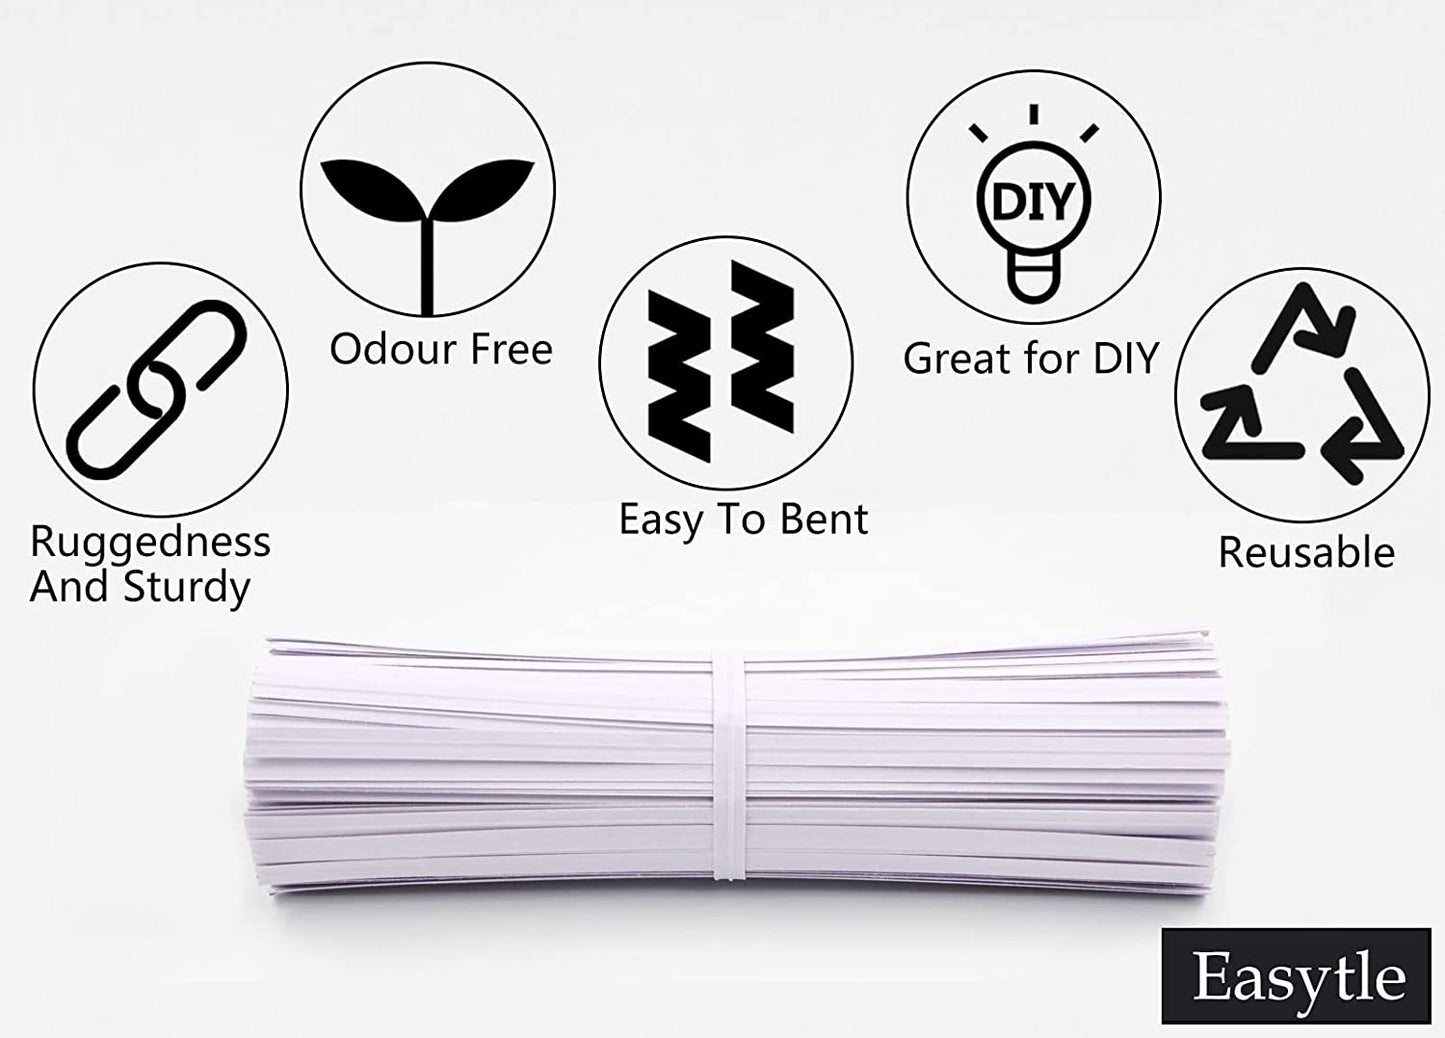 Easytle White Paper Twist Ties 100 Pcs 5" Reusable Bread Ties Twisty-ties White Twist Ties Bag Ties Twist Ties for Bags Bread Wire Ties Reusable Twist Tie for Party Cello Candy Bread Coffee Bags Cake Pops